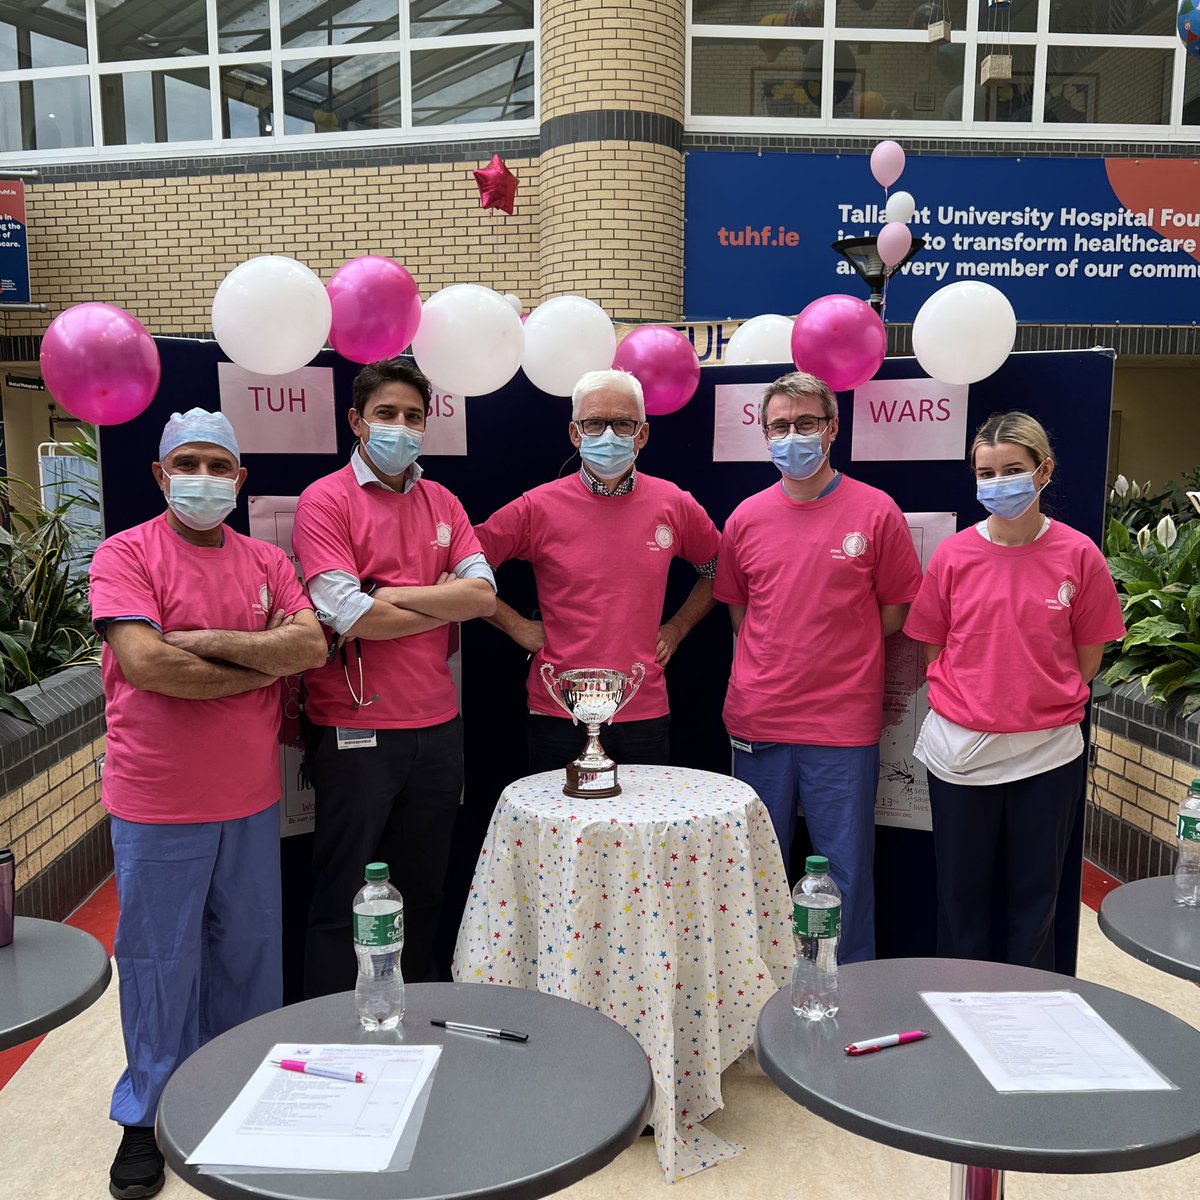 #TeamUrology ready for #SimWars (and practicing posing with the winner's trophy 😉) 🏆